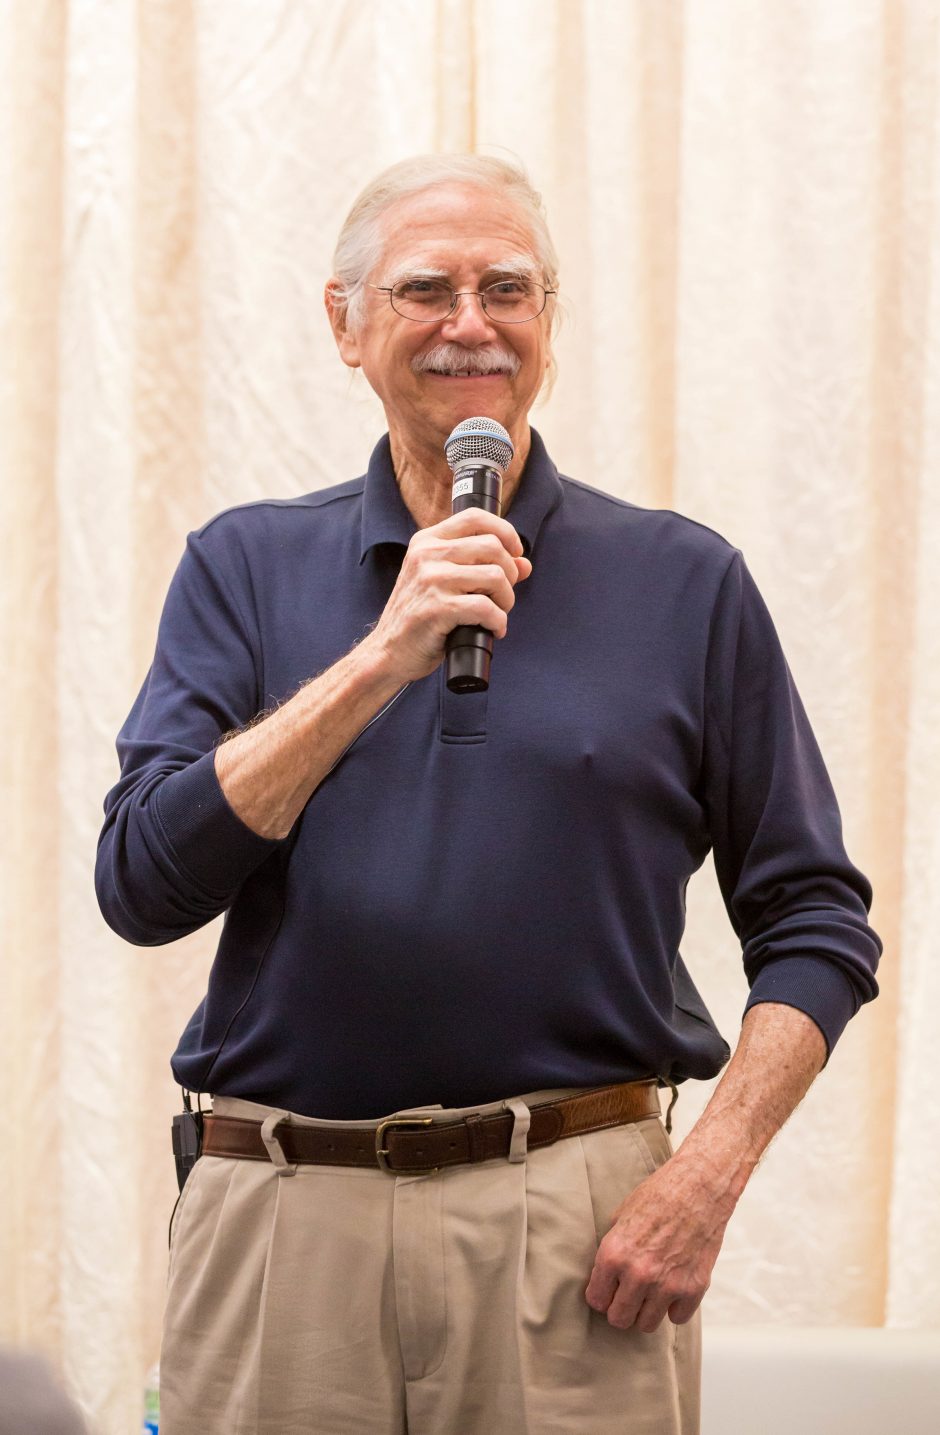 friendly older man holds mic while smiling